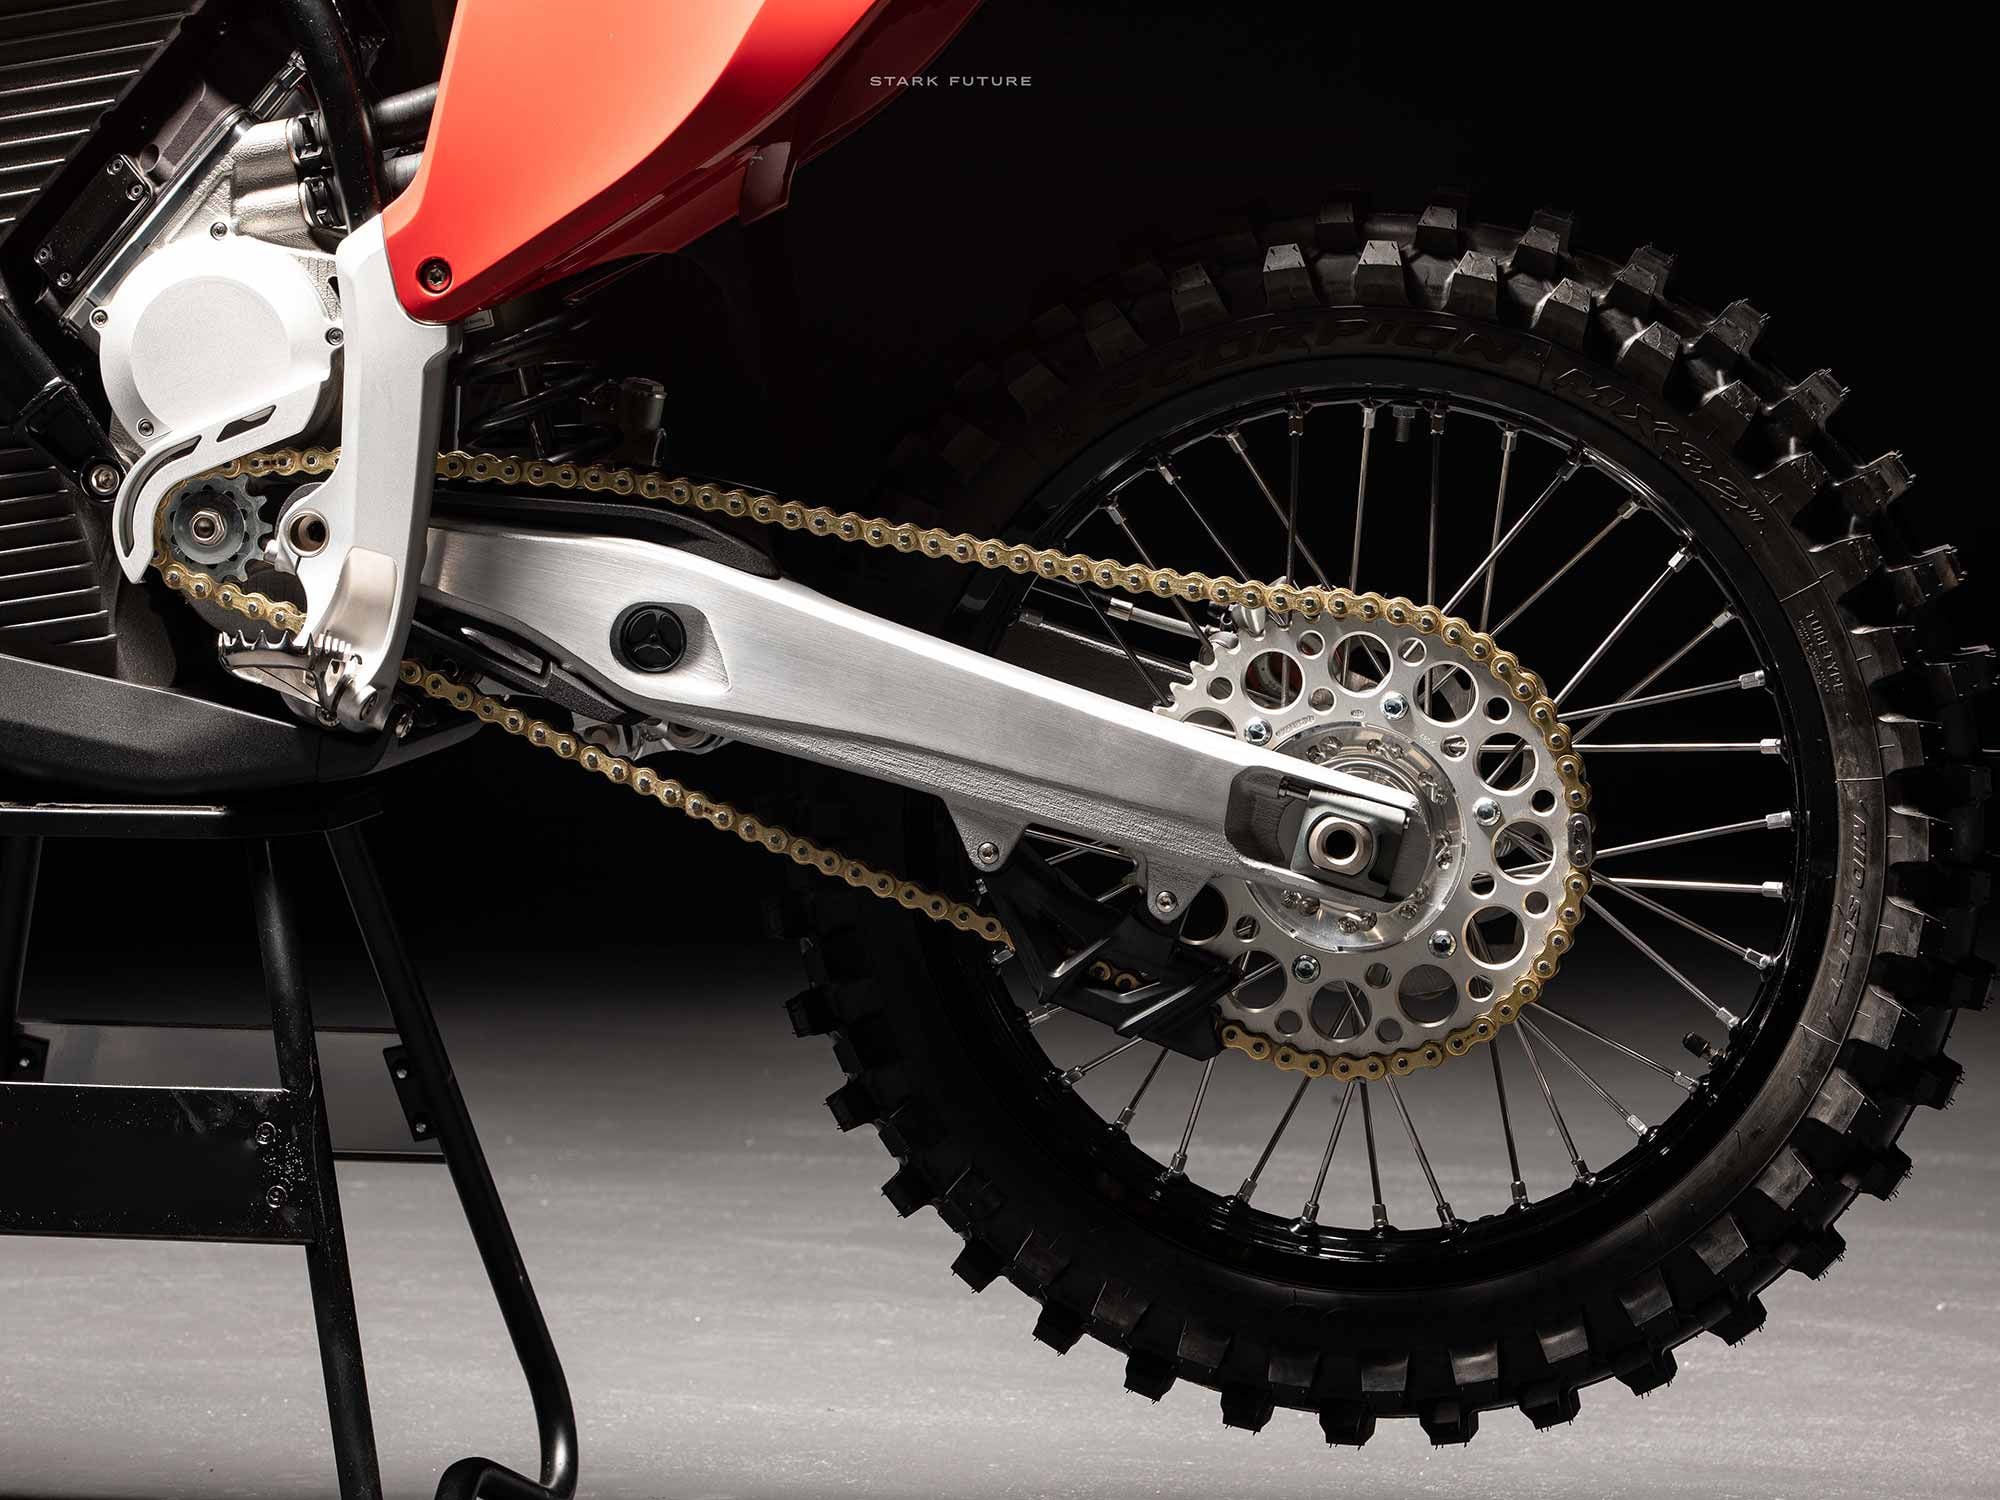 Stark developed its own wheelsets for the Varg and specced Pirelli MX32 tires. Also visible here is a closer look at the Varg-exclusive skid plate and how it serves as the bottom of the frame as well as where the carbon fiber subframe melds beautifully to the main part of the chassis. The pegs are made of a special stainless steel that Stark claims is 40 percent stronger than either titanium or chrome-moly.